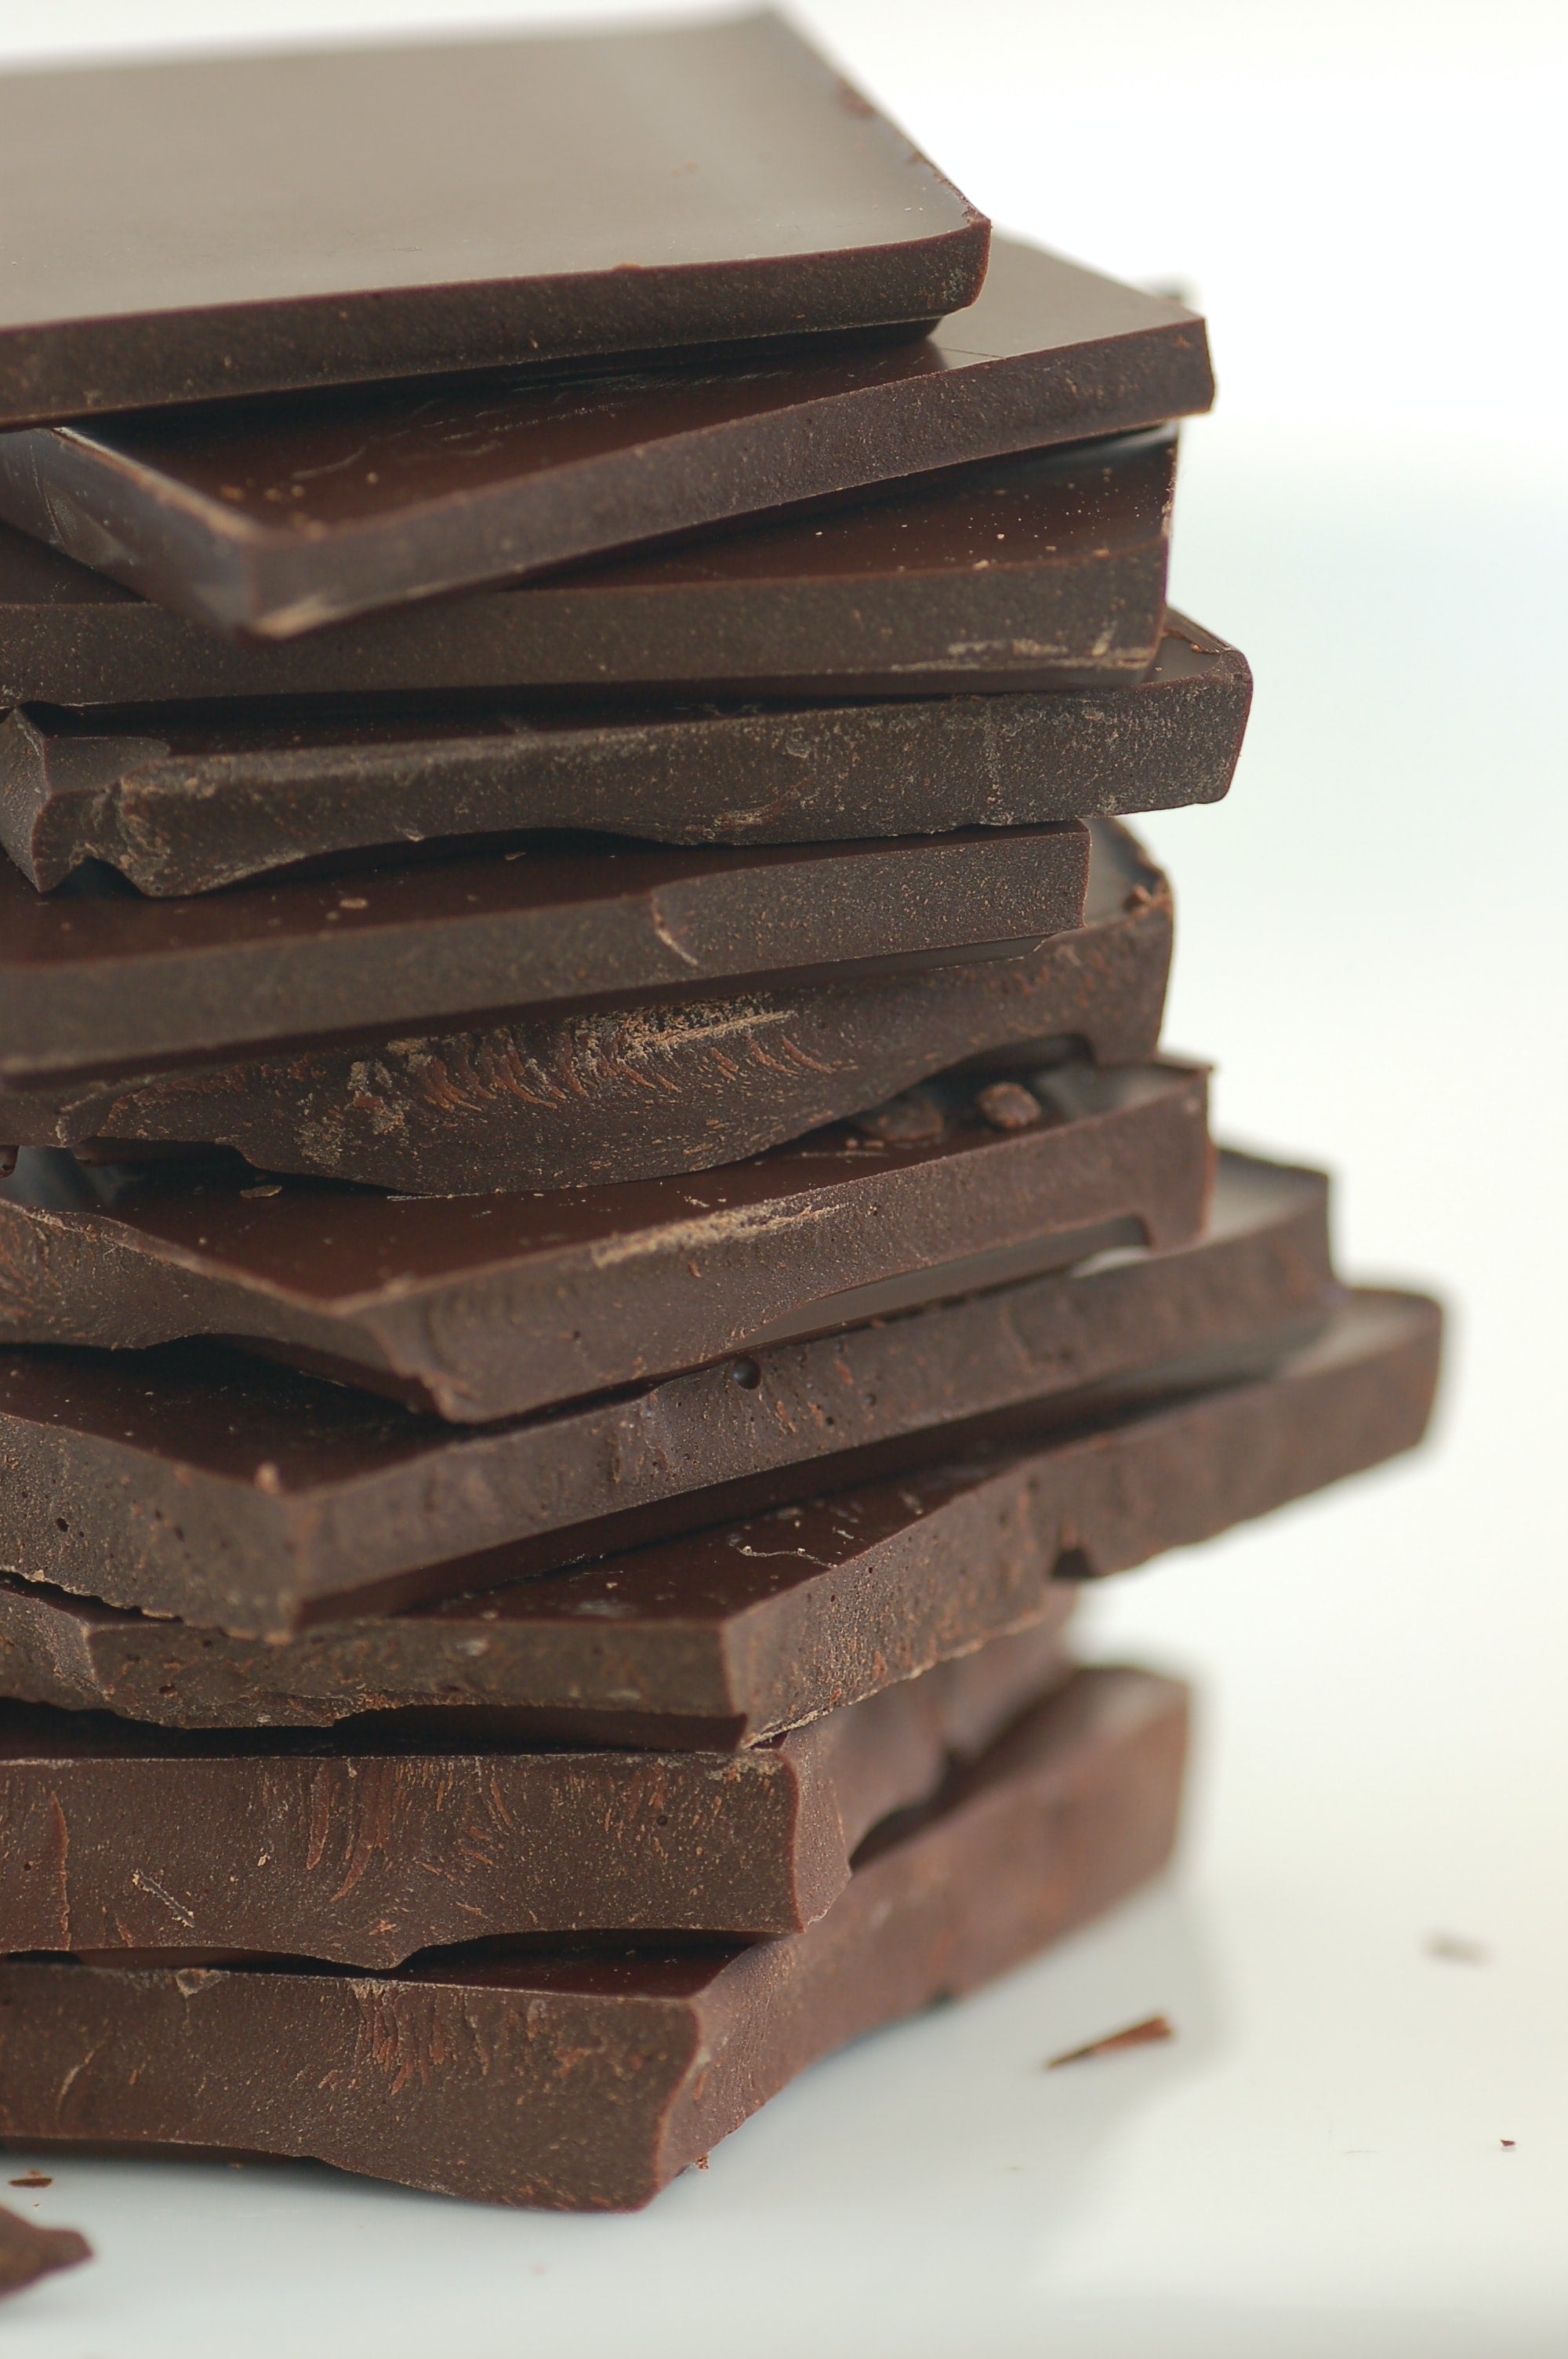 Do Chocolates Really Trigger Acne Breakouts?